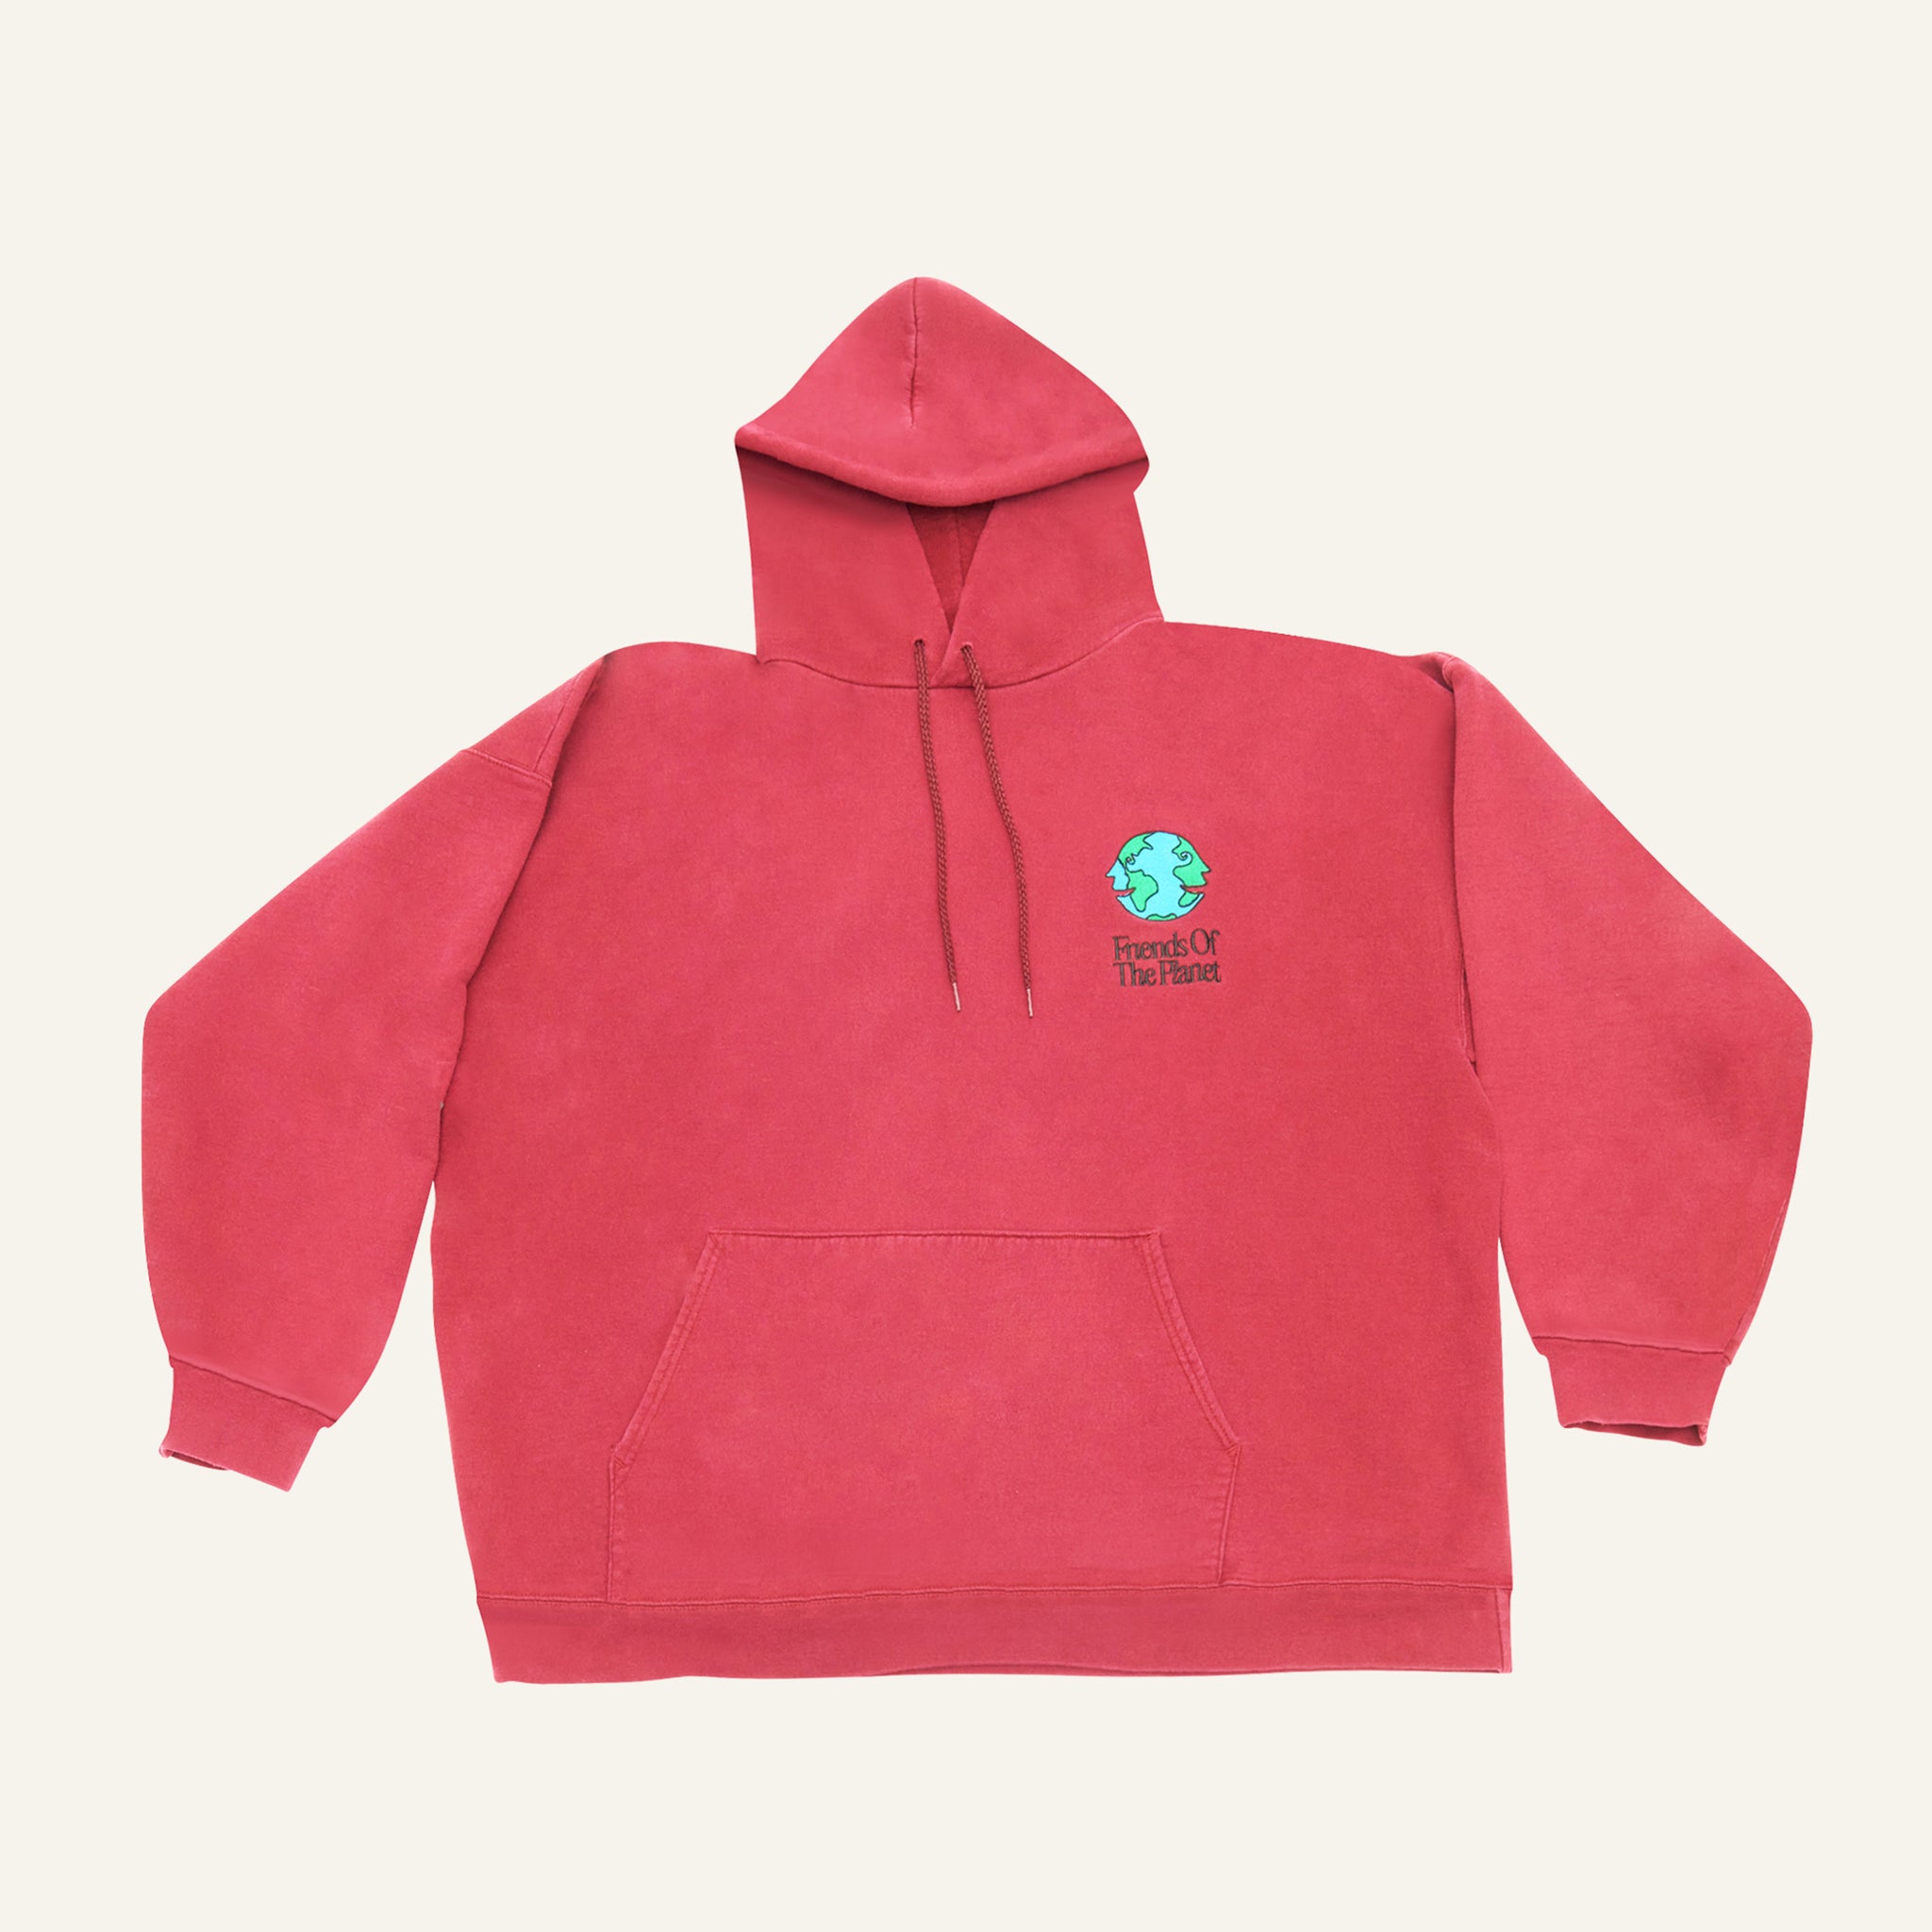 Upcycled Hoodie in Dusk Red ☯ Size XL